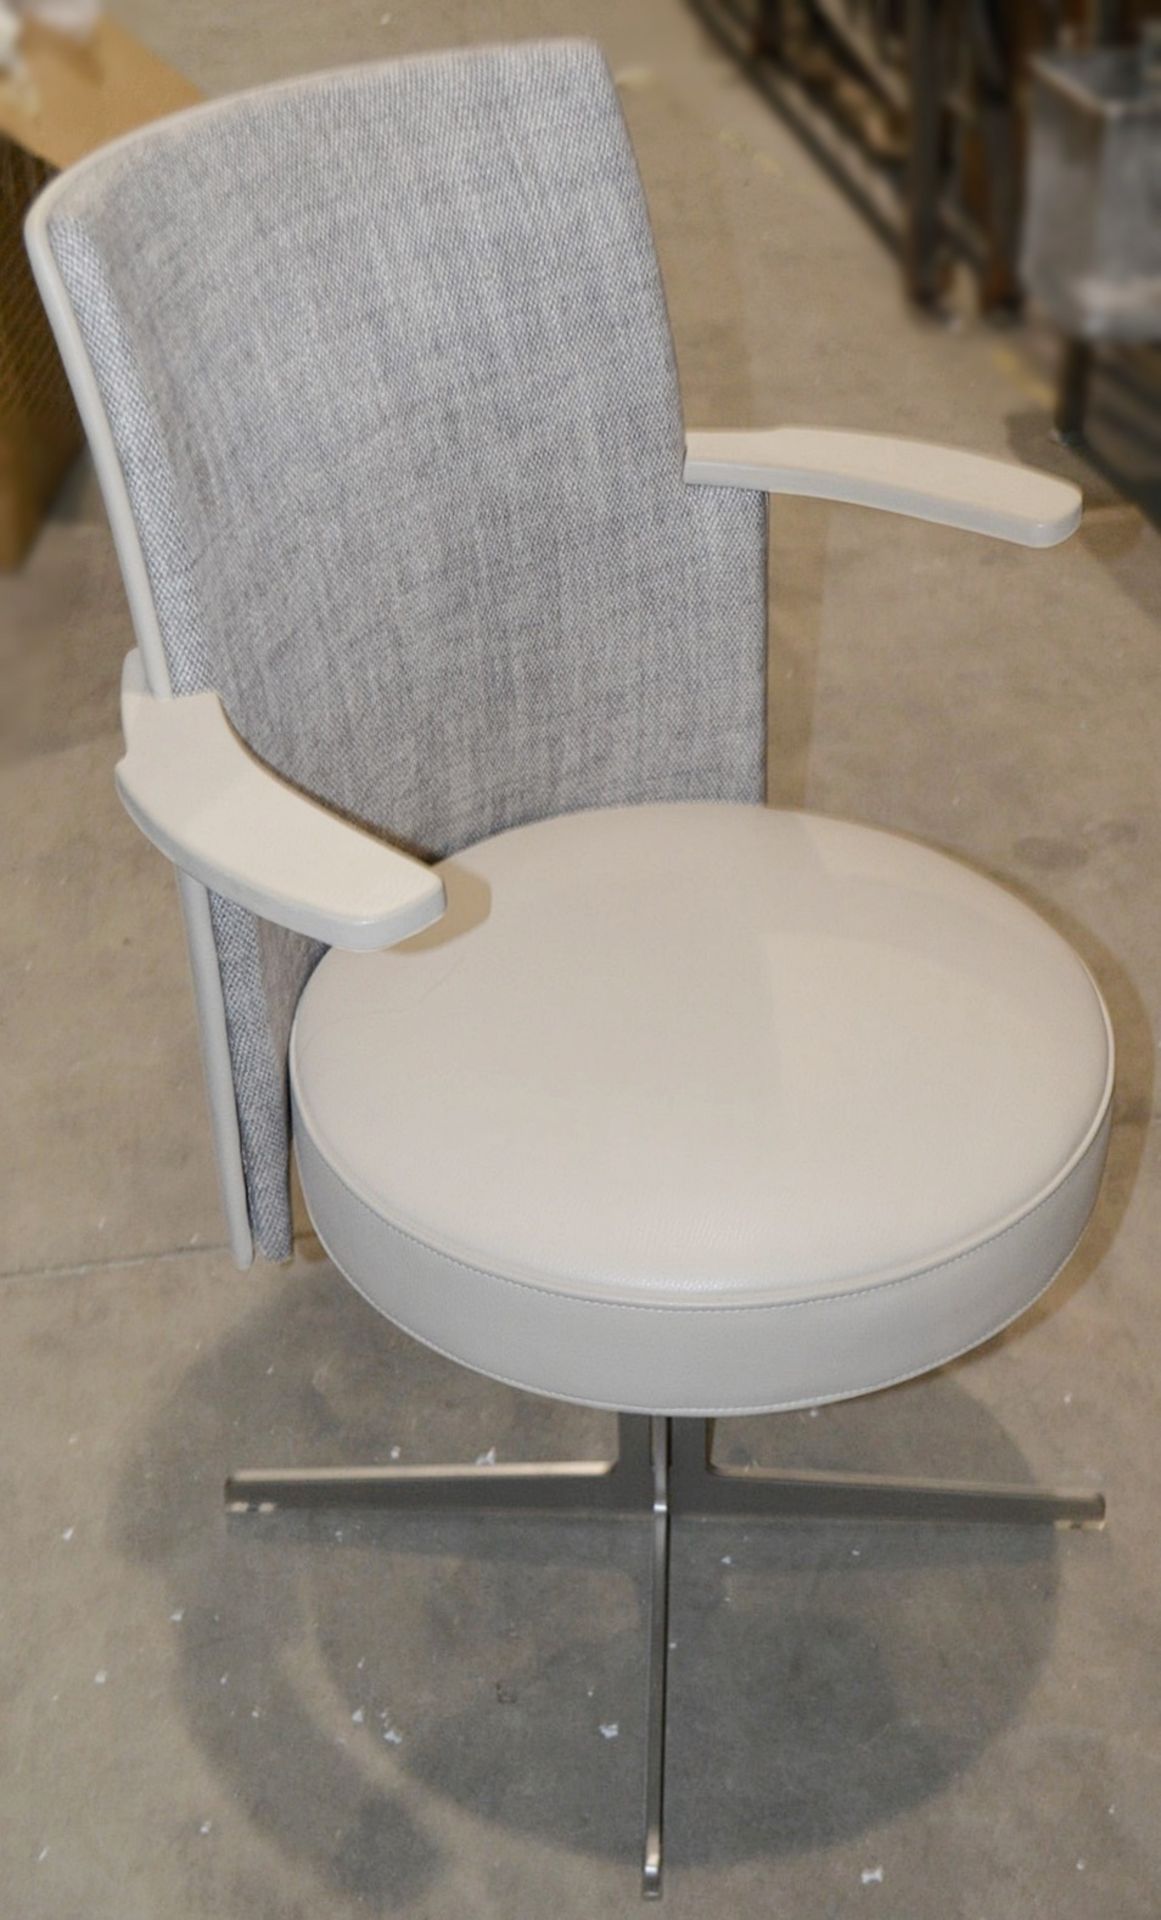 1 x POLTRONA FRAU 'Jeff' Designer Swivel Chair With Arms - Upholstered In Leather And Premium Fabric - Image 3 of 11